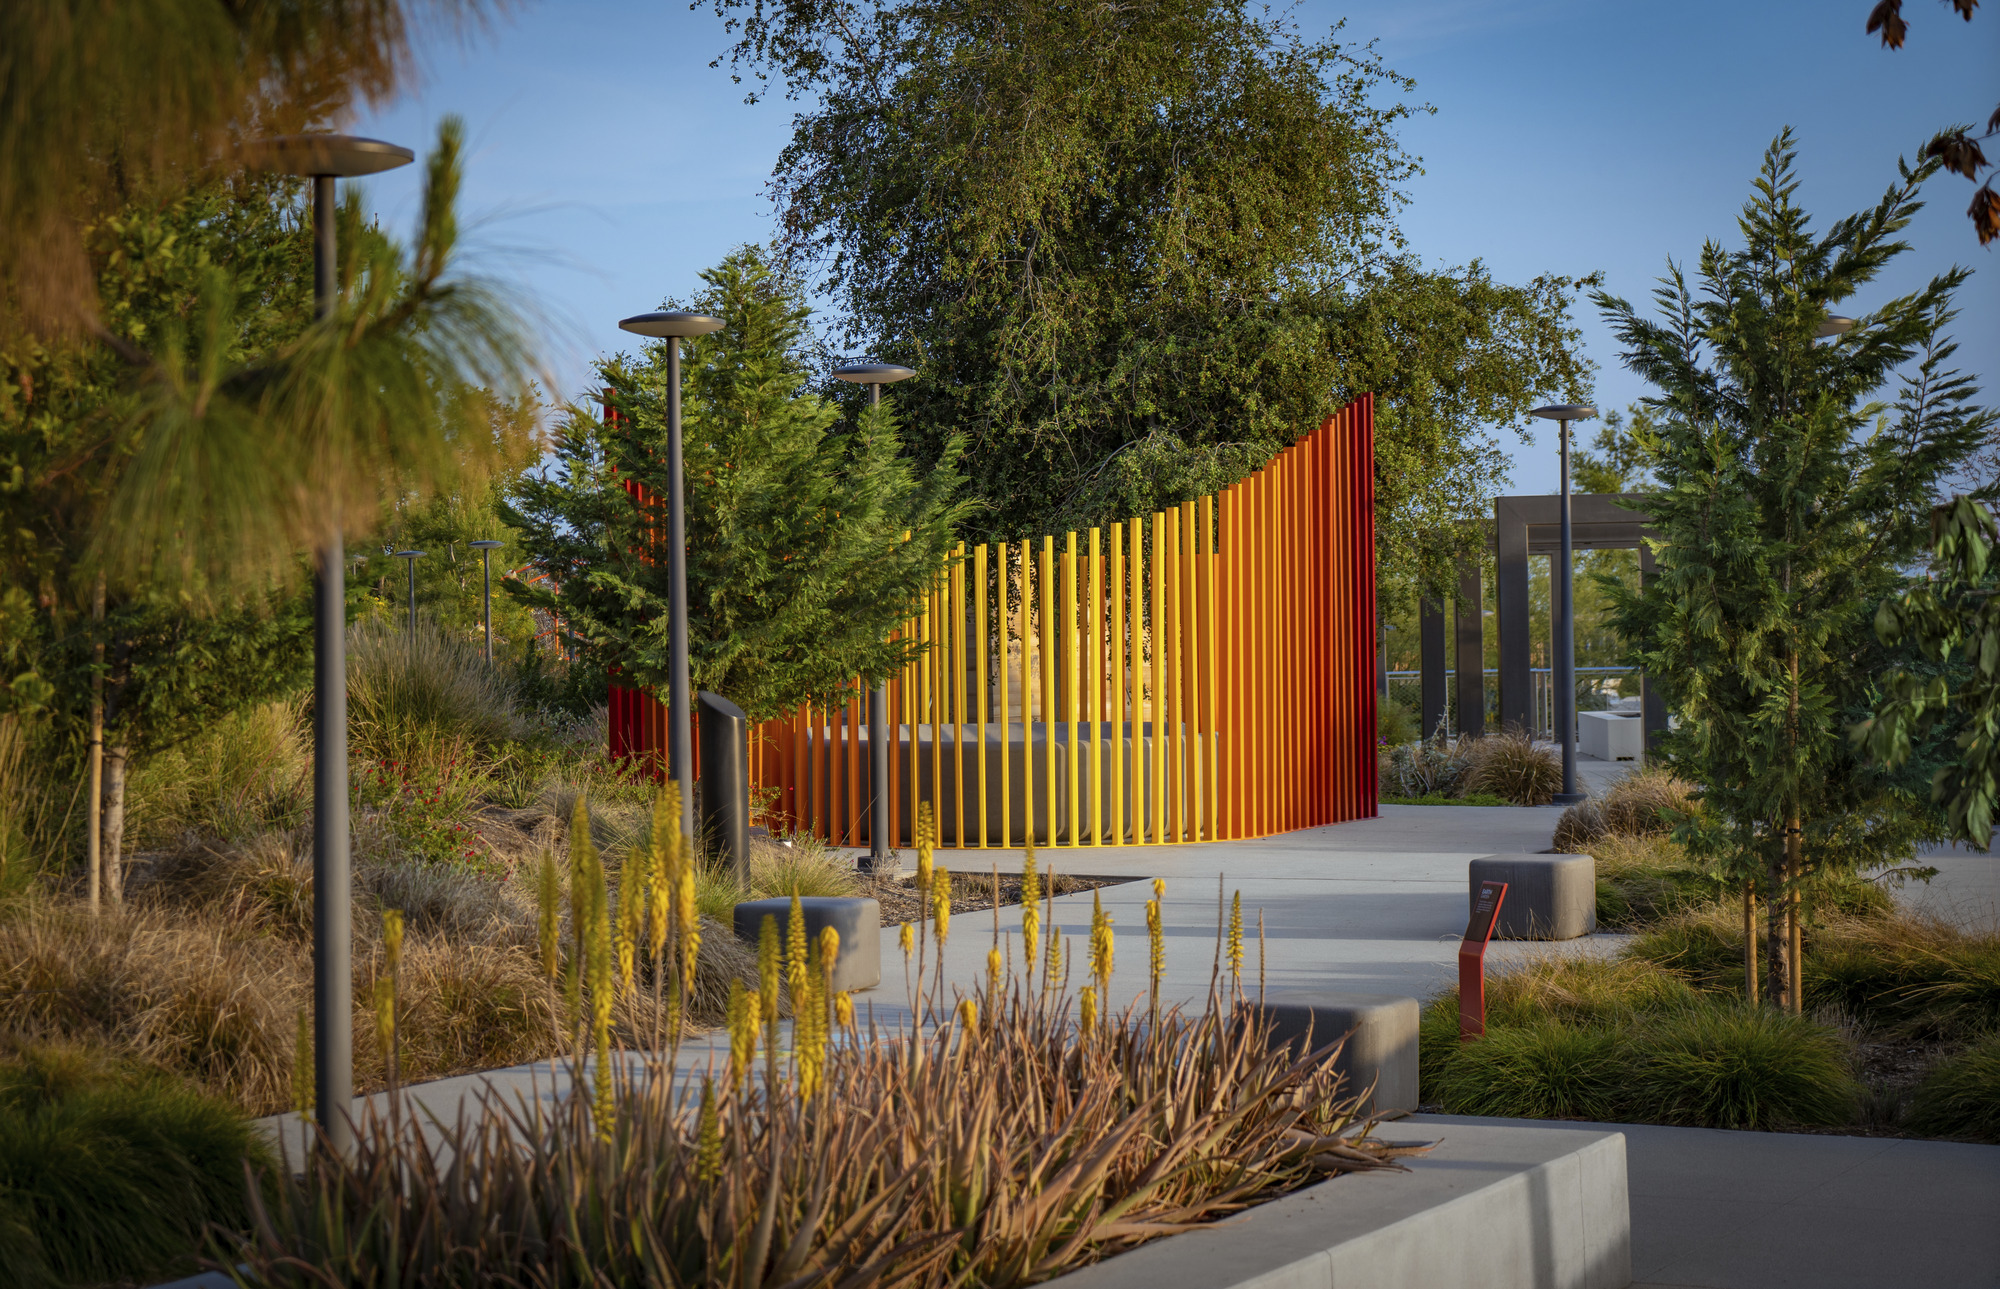 The Sky Garden Sculptural Seating at the Orange County Great Park Honored with a SIT Furniture Design Award